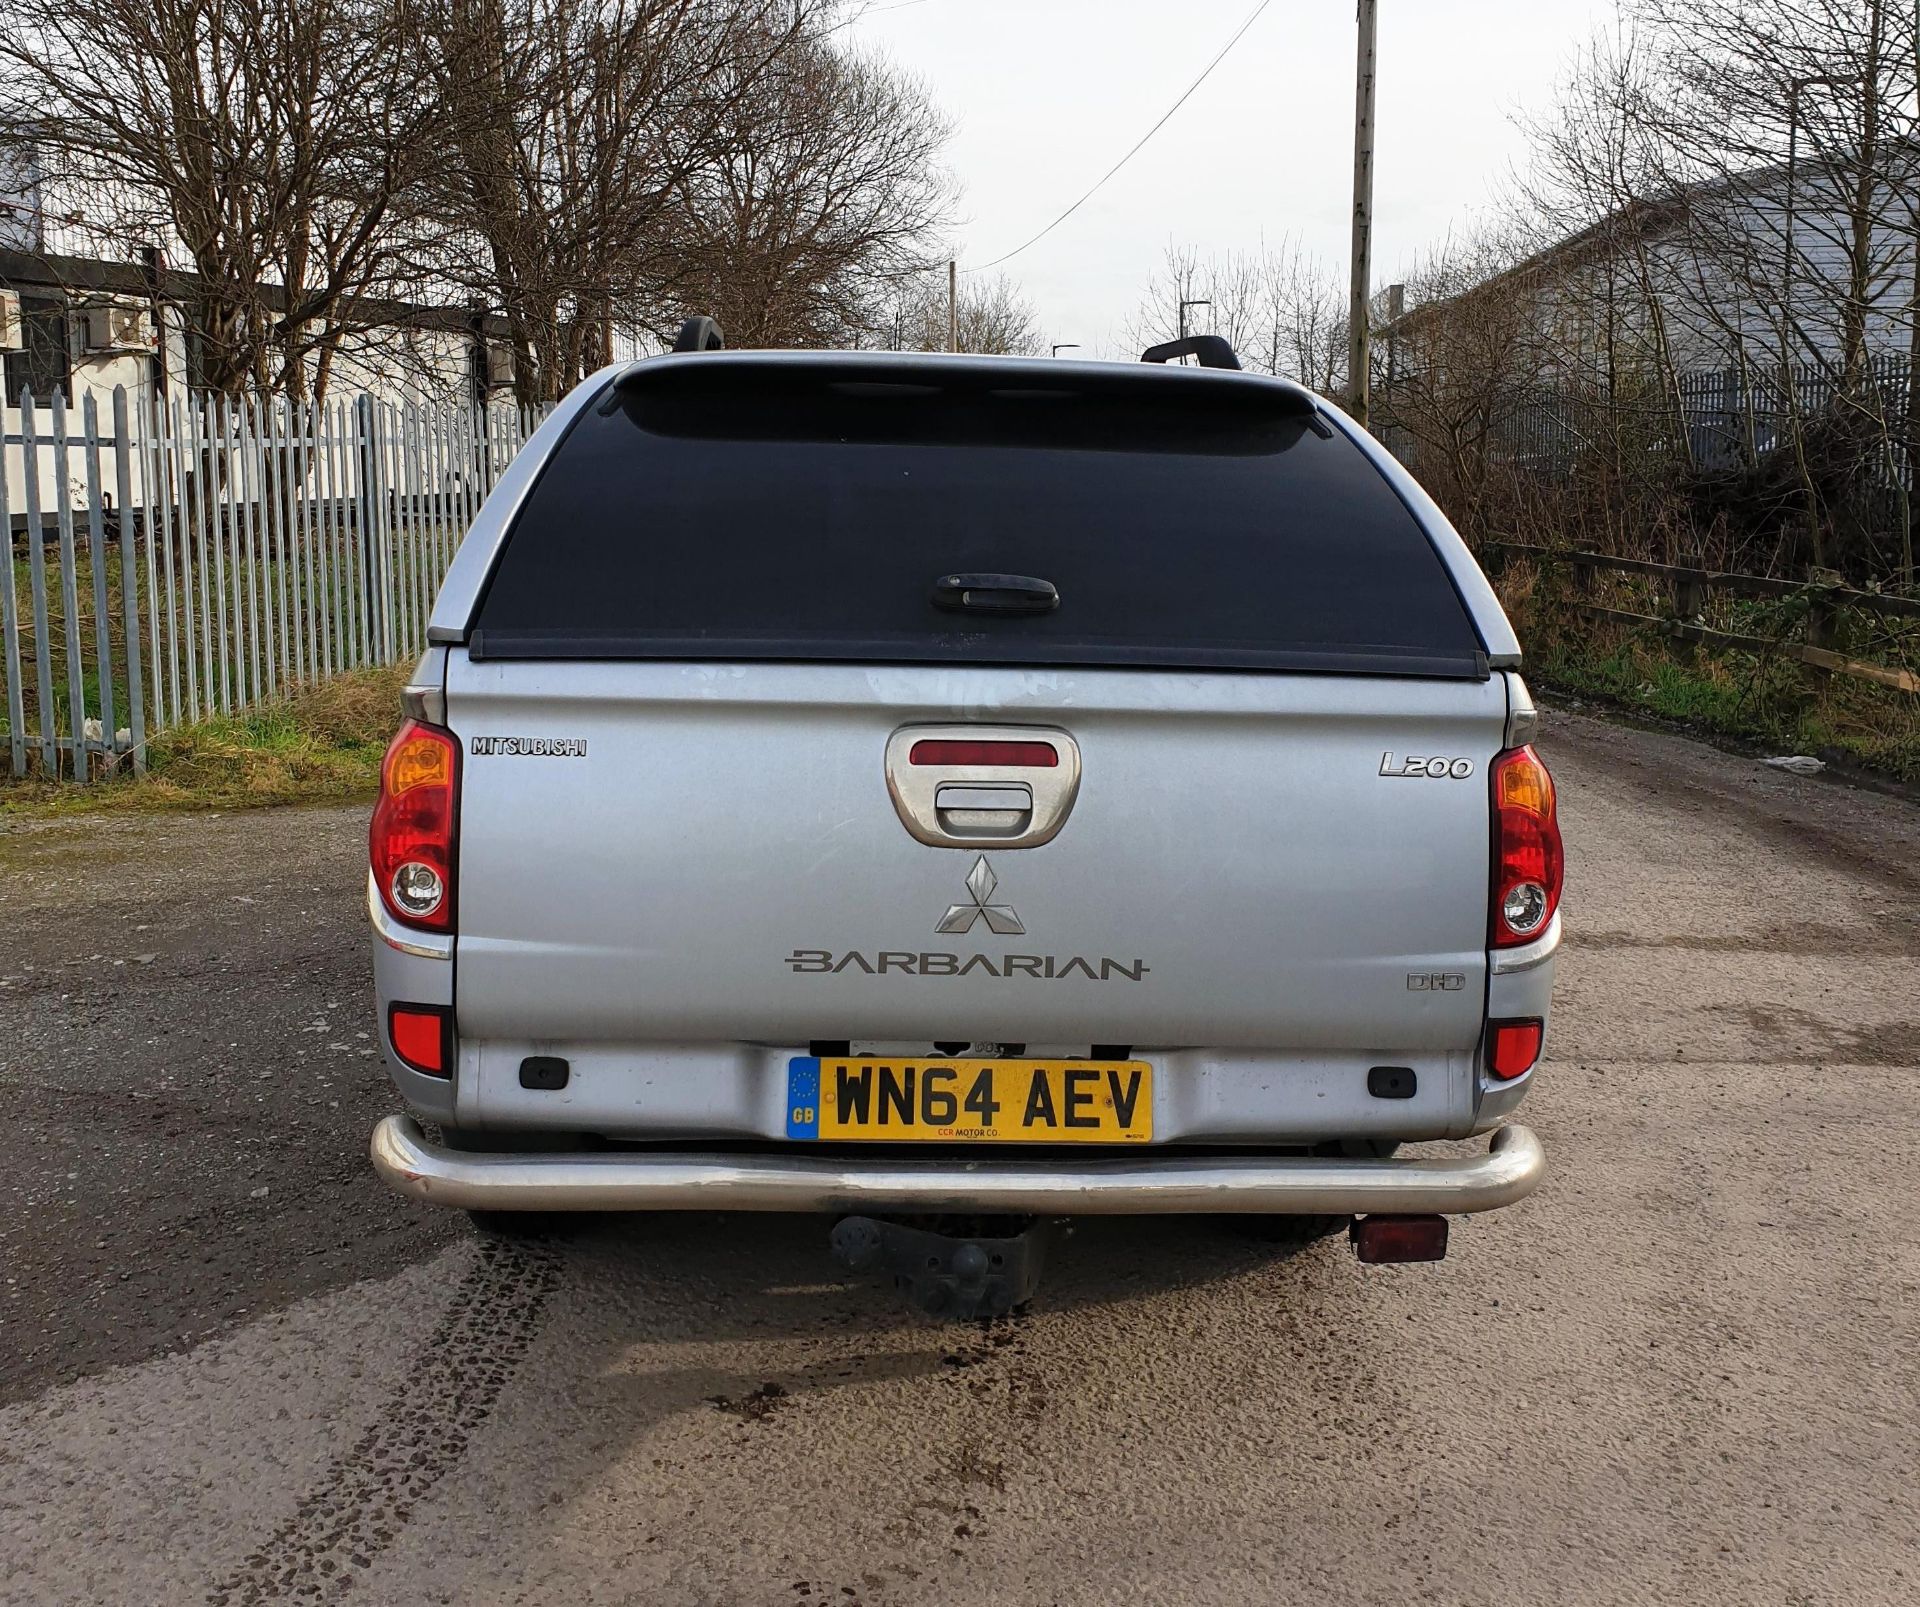 Mitsubishi L200 Barbarian LB DCB DI-D 4X4 Pick Up, registration WN64 AEV, first registered 1 October - Image 4 of 7